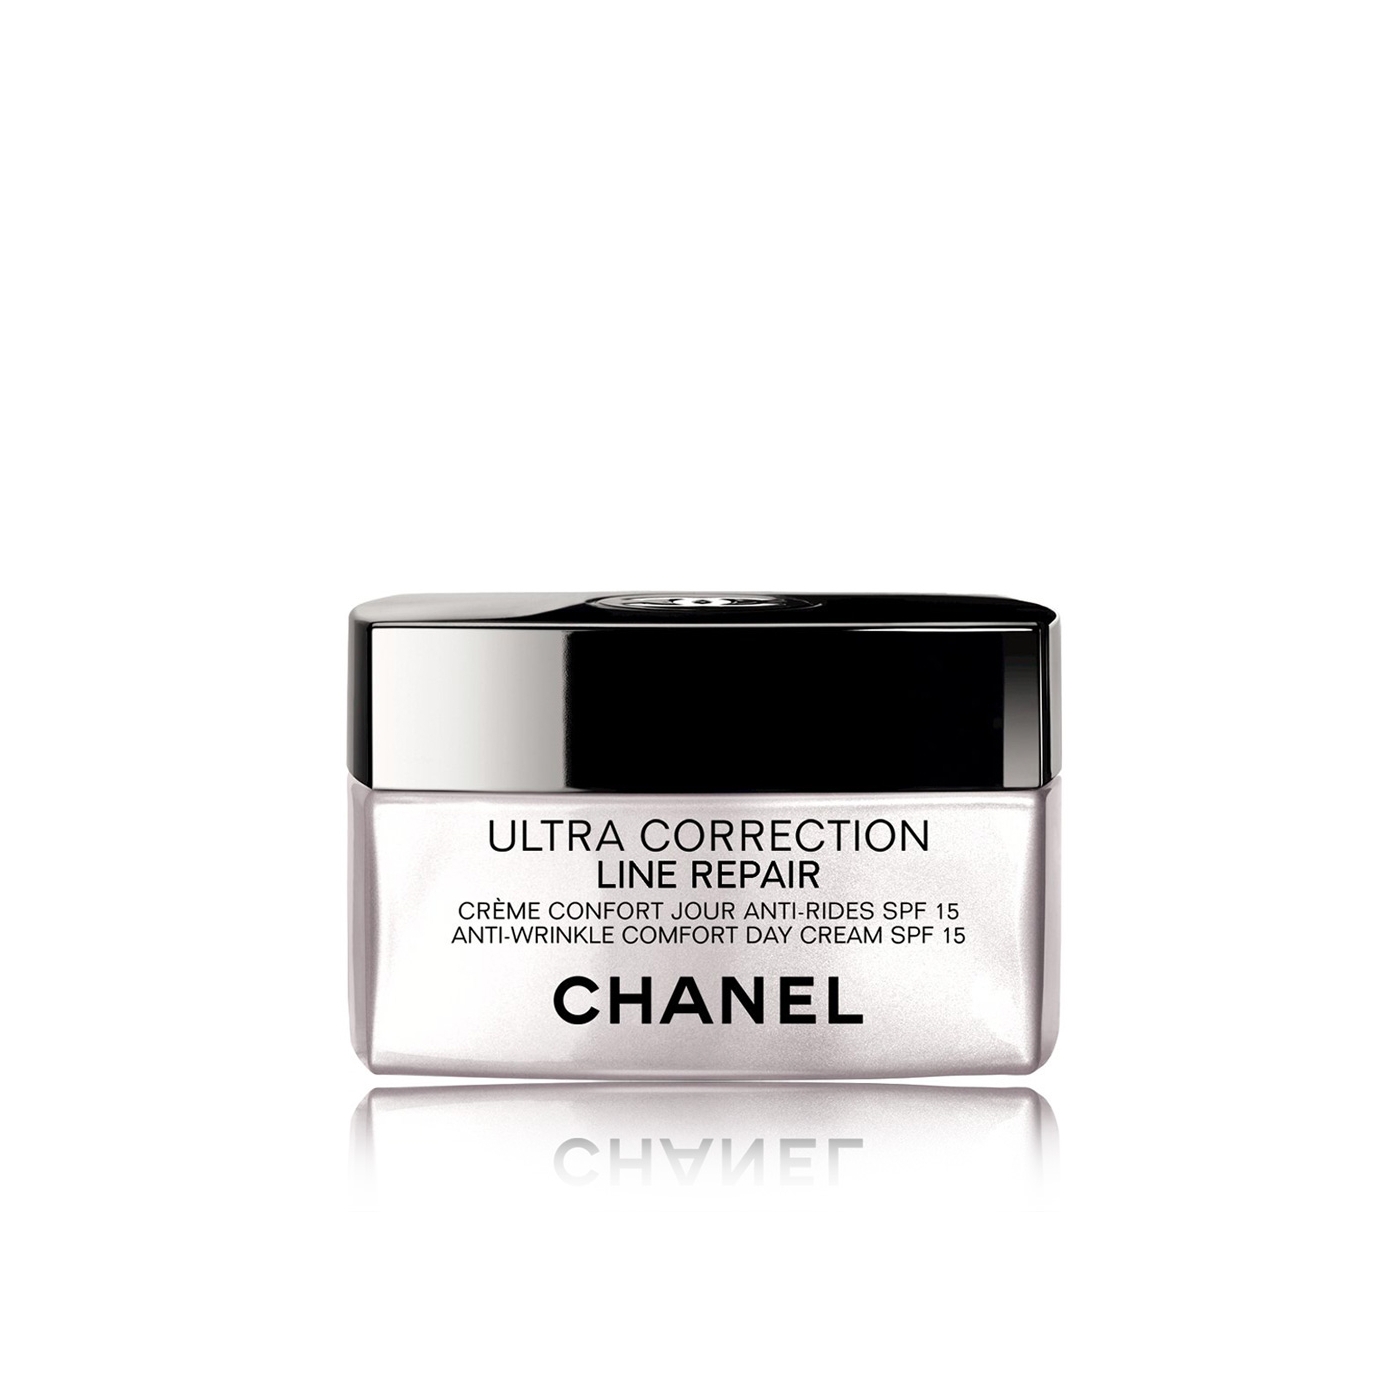 CHANEL ULTRA CORRECTION LINE REPAIR Anti Wrinkle Day Cream SPF 15   Comfort Texture